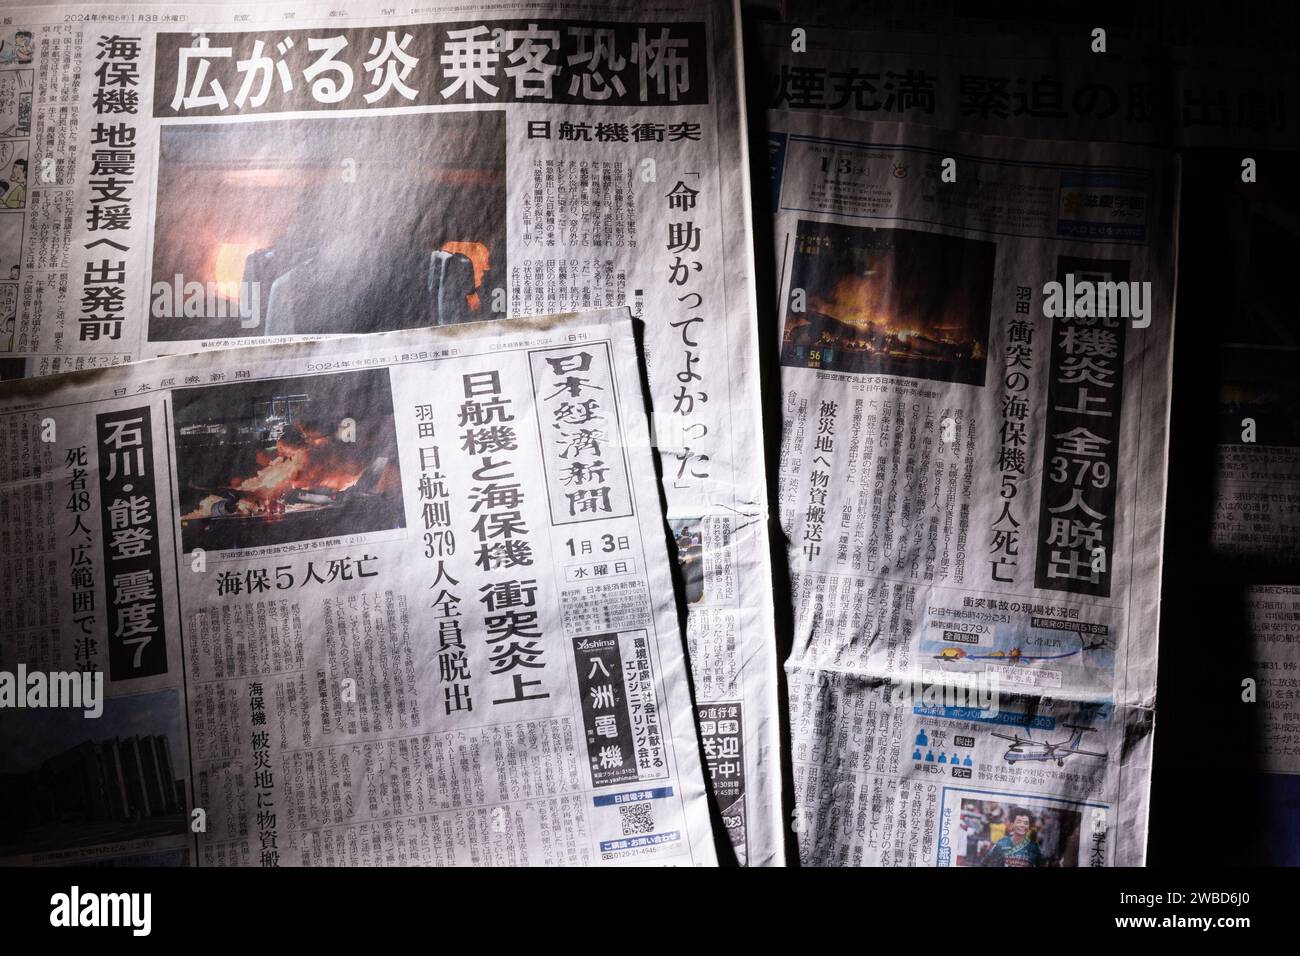 Japanese newspapers on January 3, 2024 reporting the 2024 Haneda Airport runway collision are seen in Tokyo, Japan on January 10, 2024. On January 2, 2024, a runway collision occurred between an Airbus A350, operating Japan Airlines Flight 516 and a De Havilland Canada Dash 8 operated by the Japan Coast Guard at Haneda Airport in Tokyo, Japan. After the collision, both airplane aircraft caught fire. Five of the six crew of the Japan Coast Guard on Dash 8 died, but all 367 passengers and 12 crew on the Airbus A350 survived. Credit: Shingo Tosha/AFLO/Alamy Live News Stock Photo